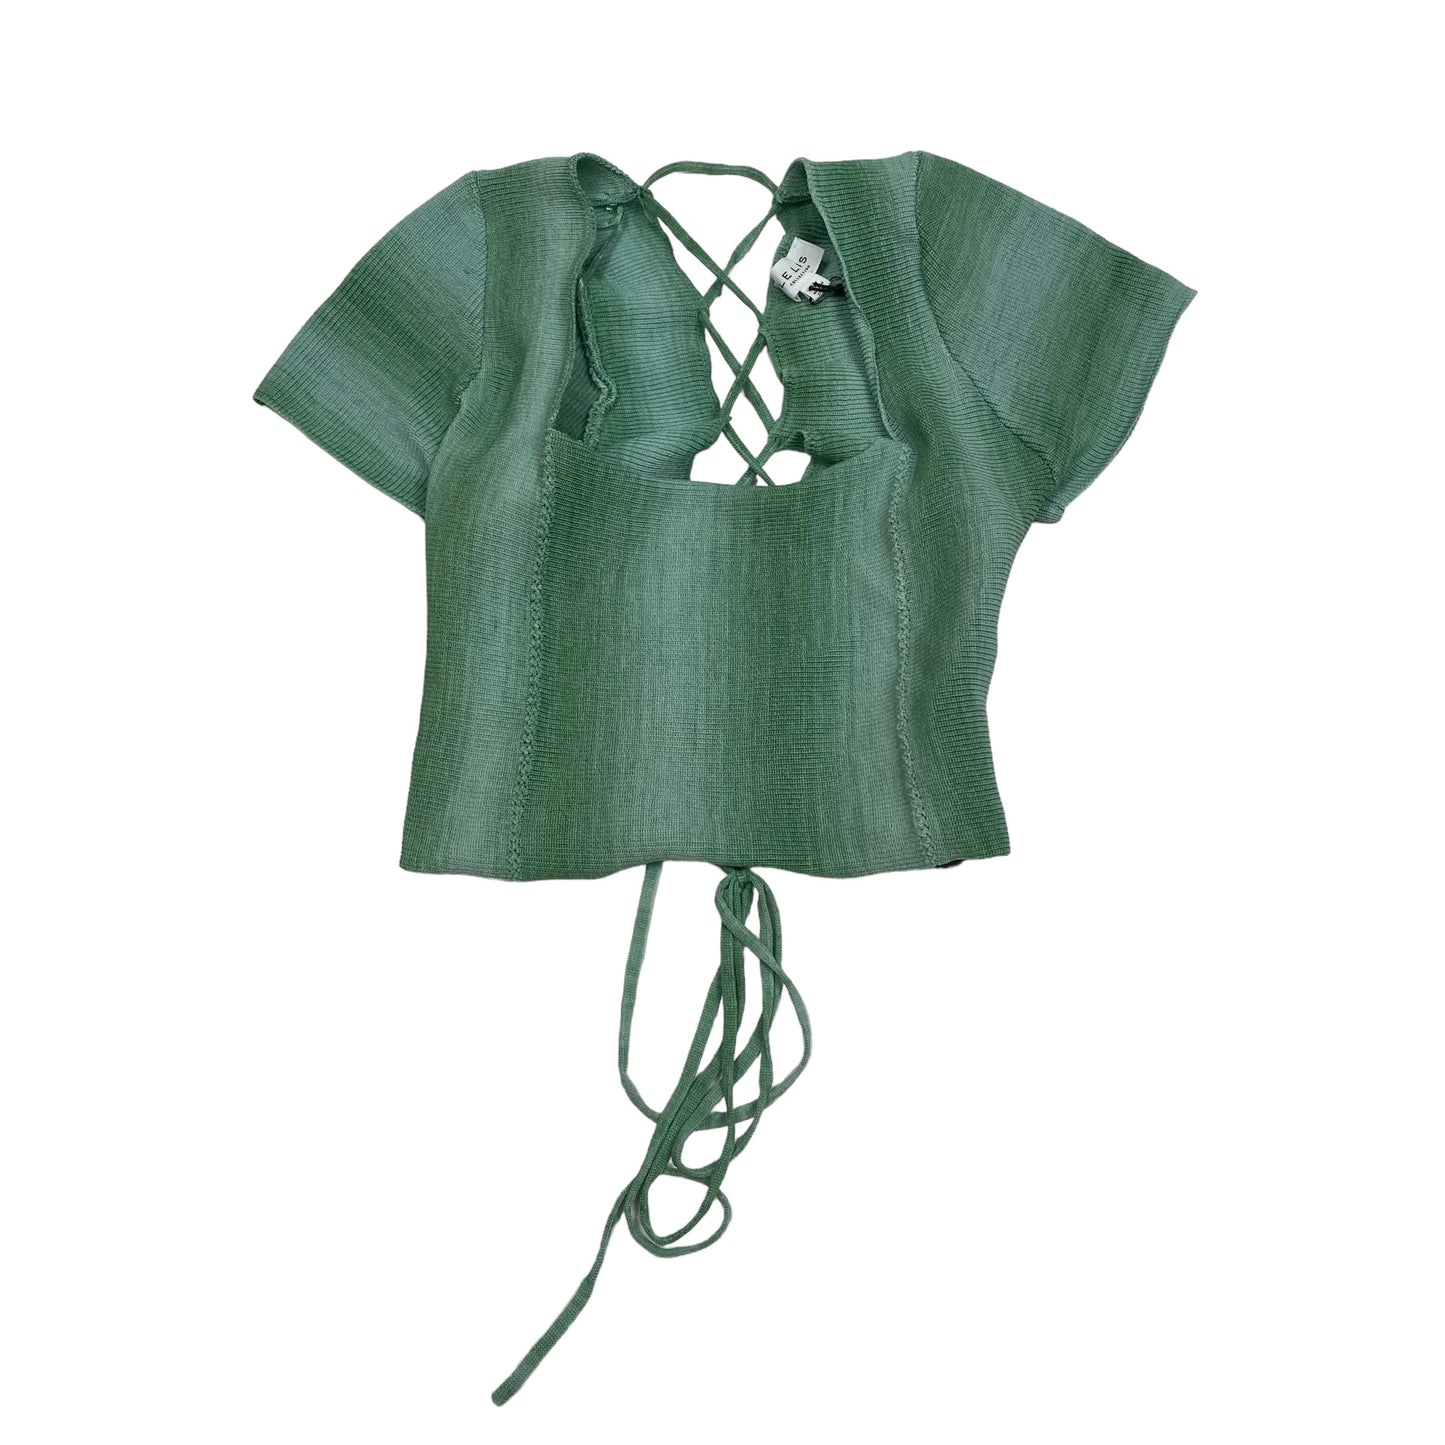 Green Top Short Sleeve Le Lis, Size M